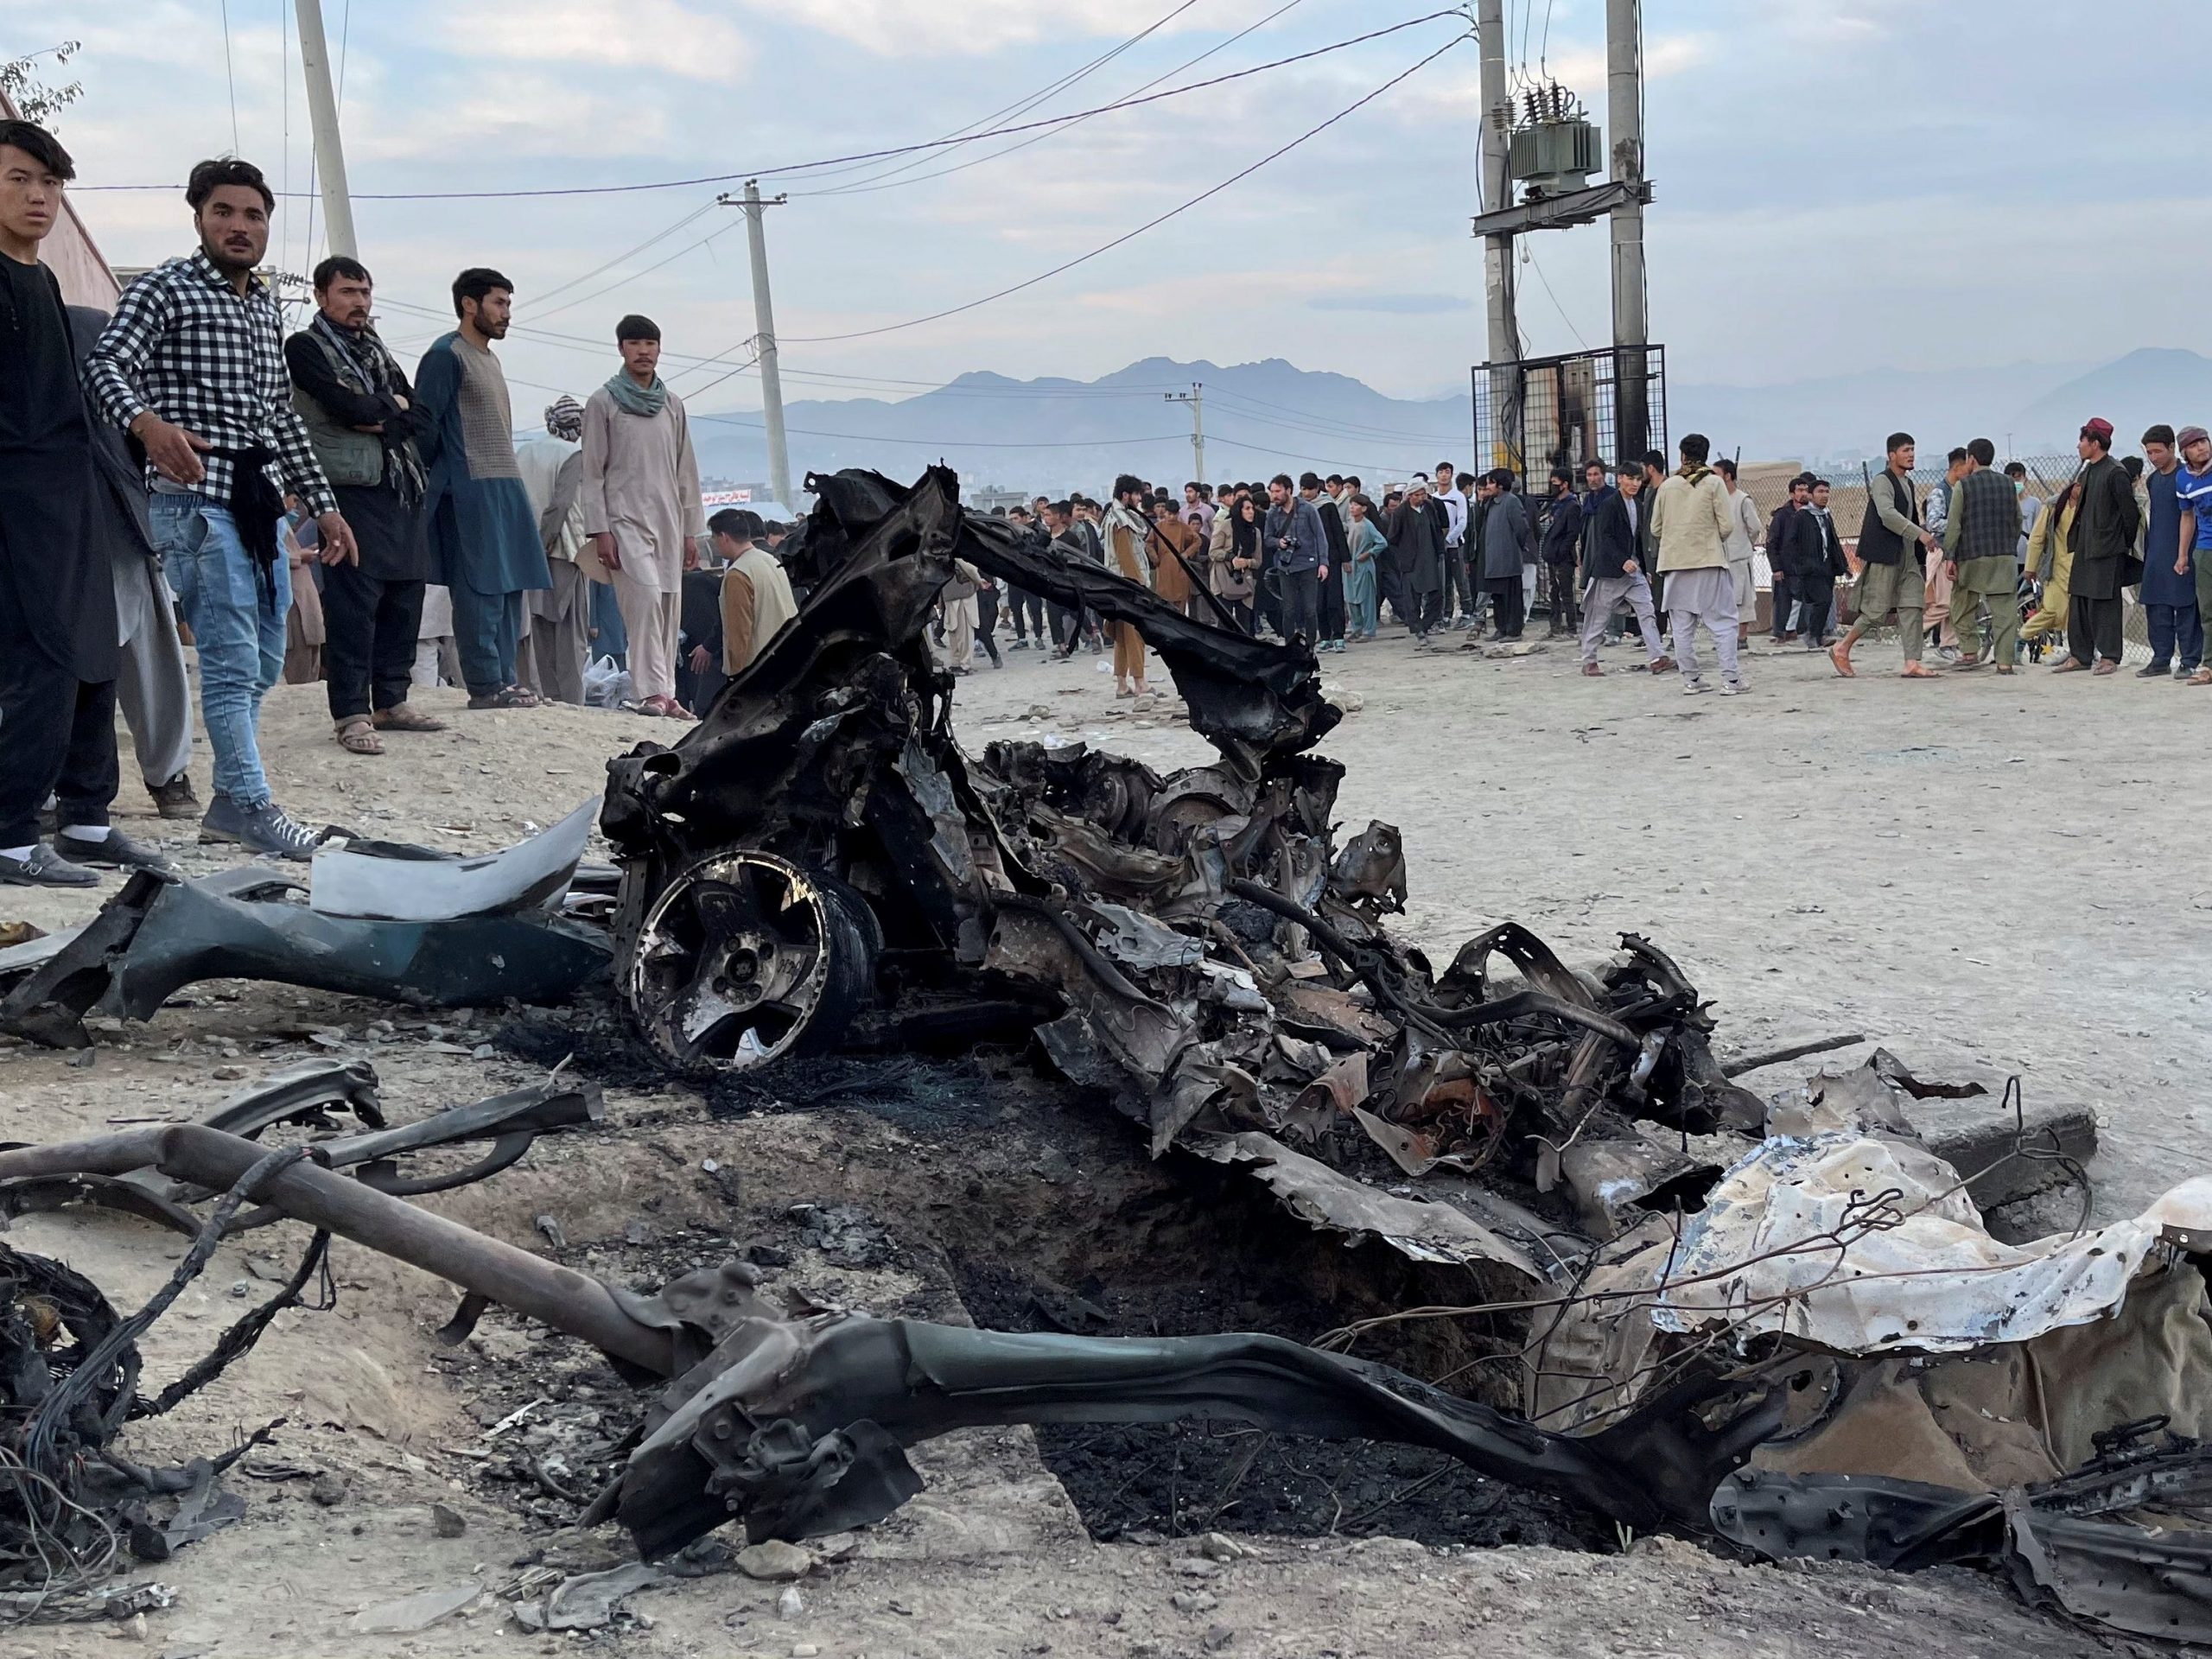 People stand at site of car explosion in. Kabul, Afghanistan